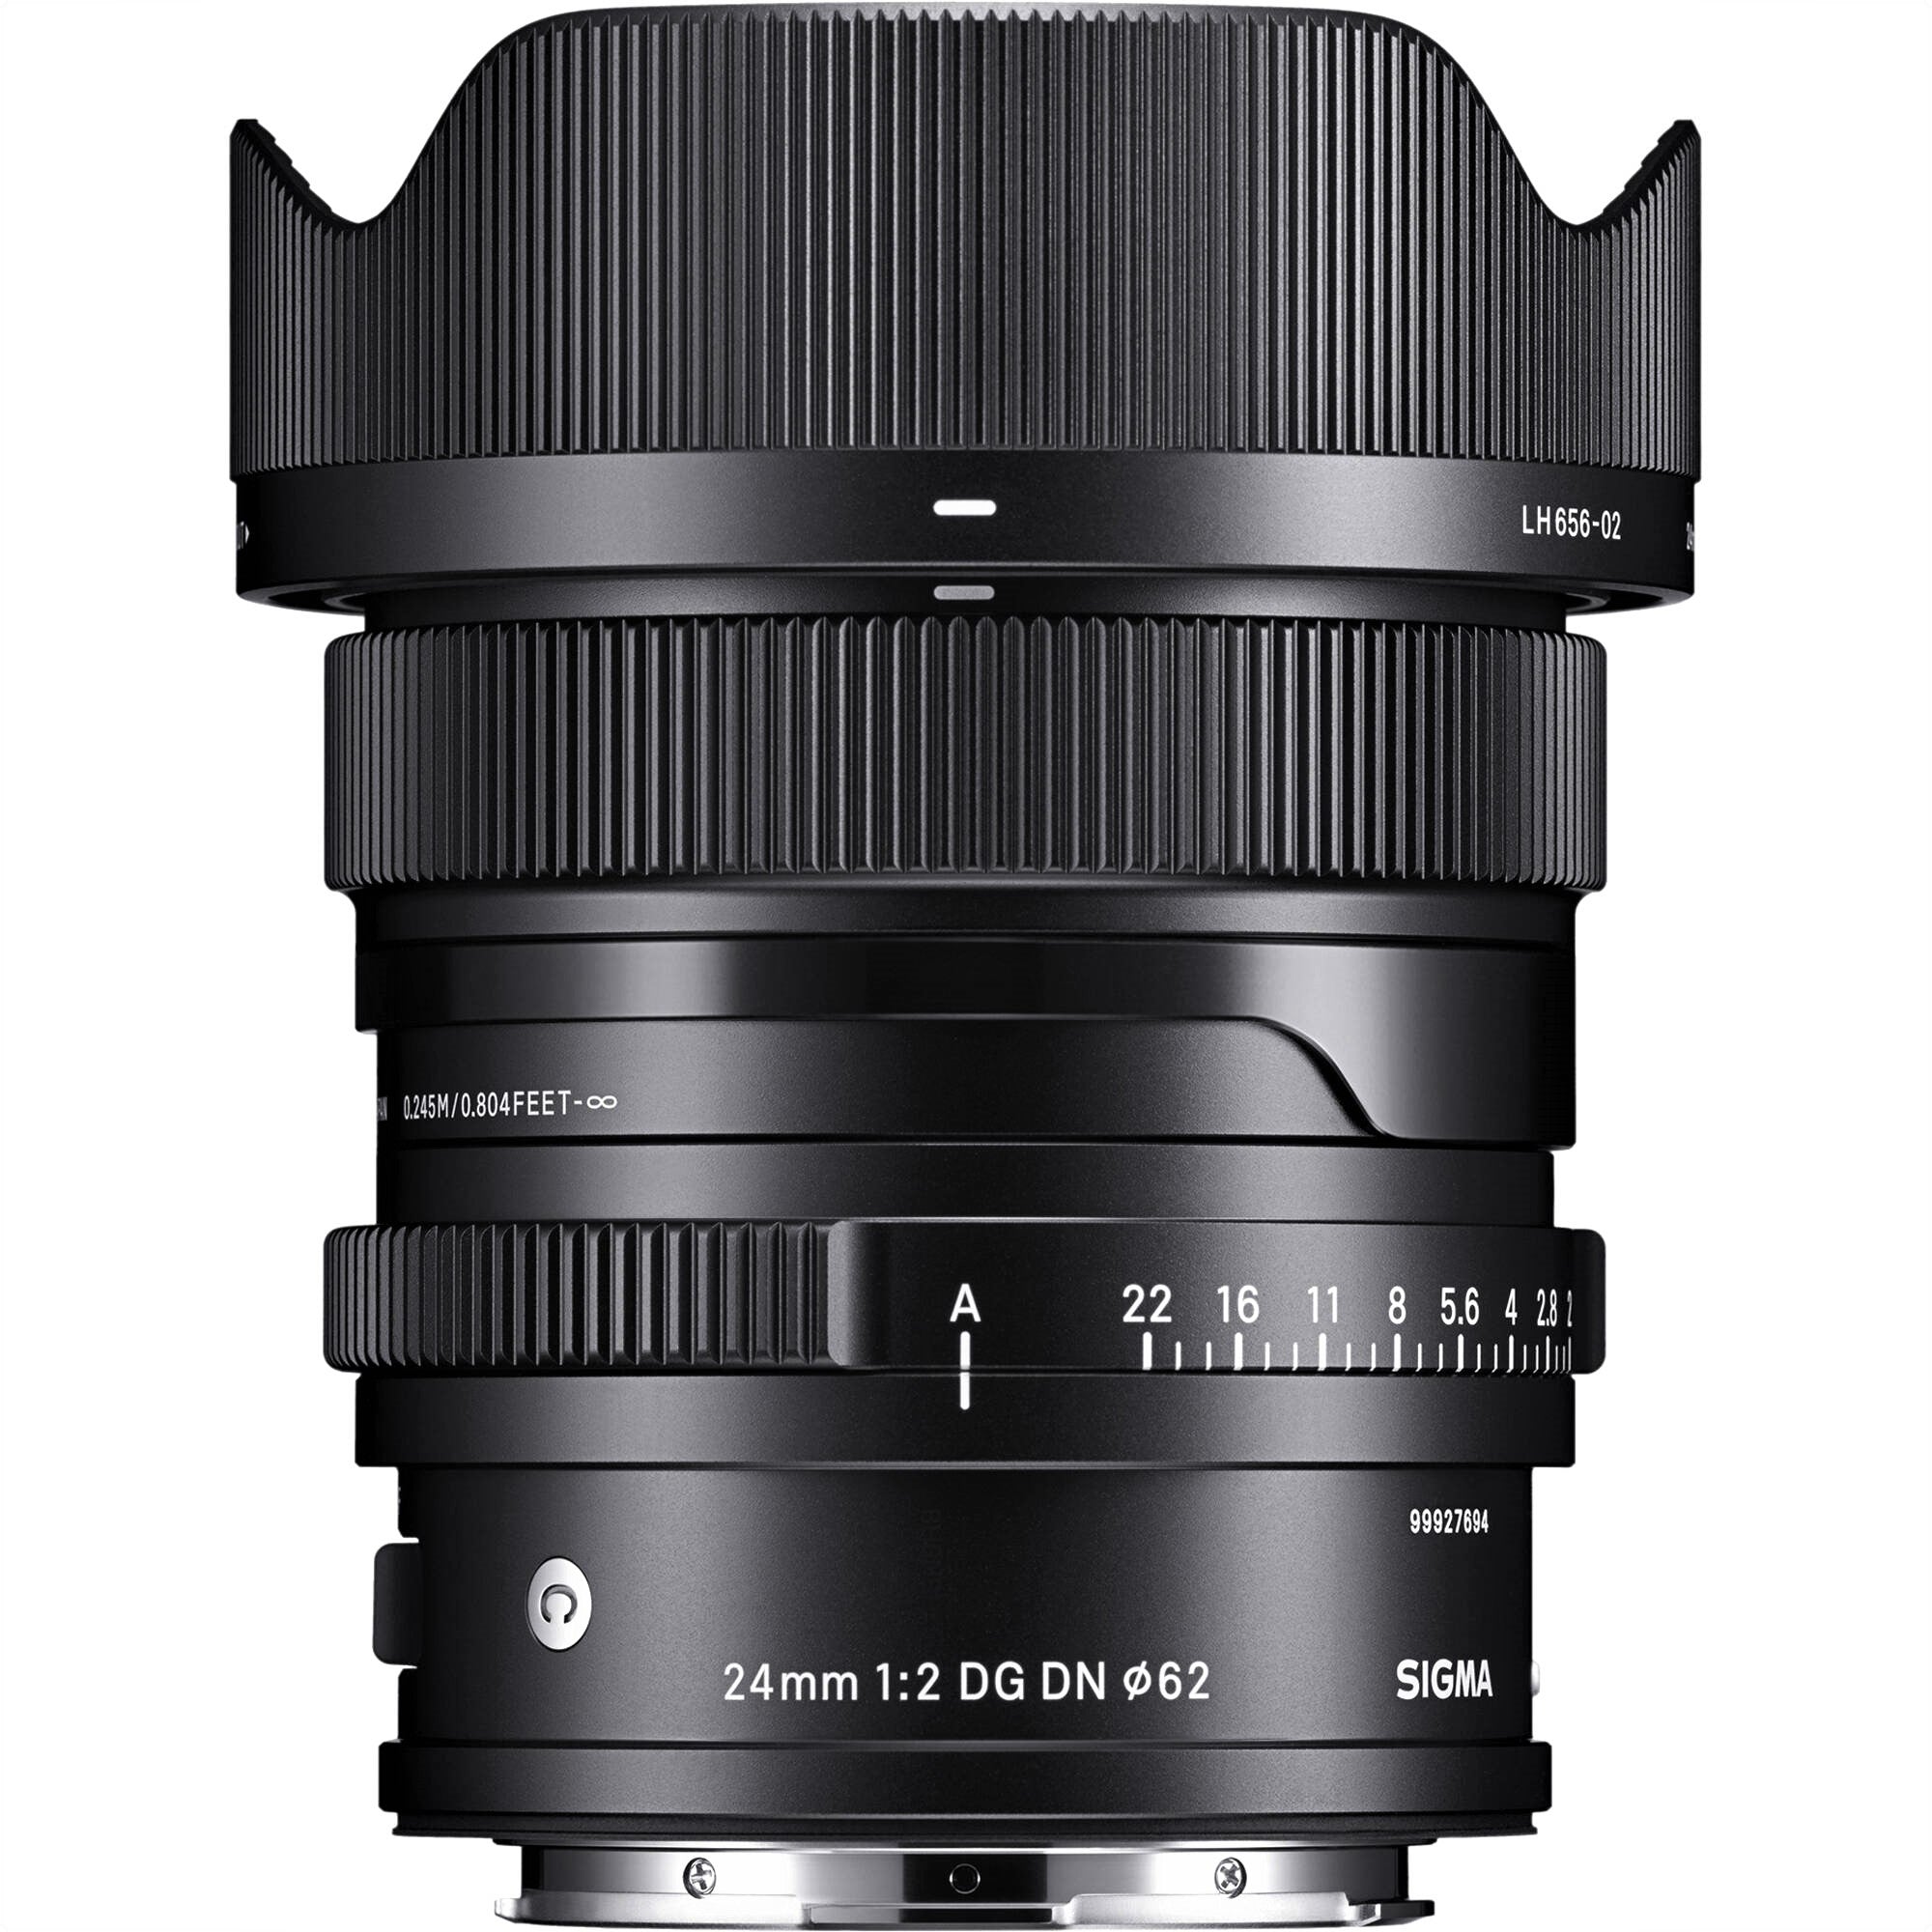 Sigma 24mm F2.0 DG DN Contemporary Lens (Leica L Mount) with Attached Lens Hood on the Top